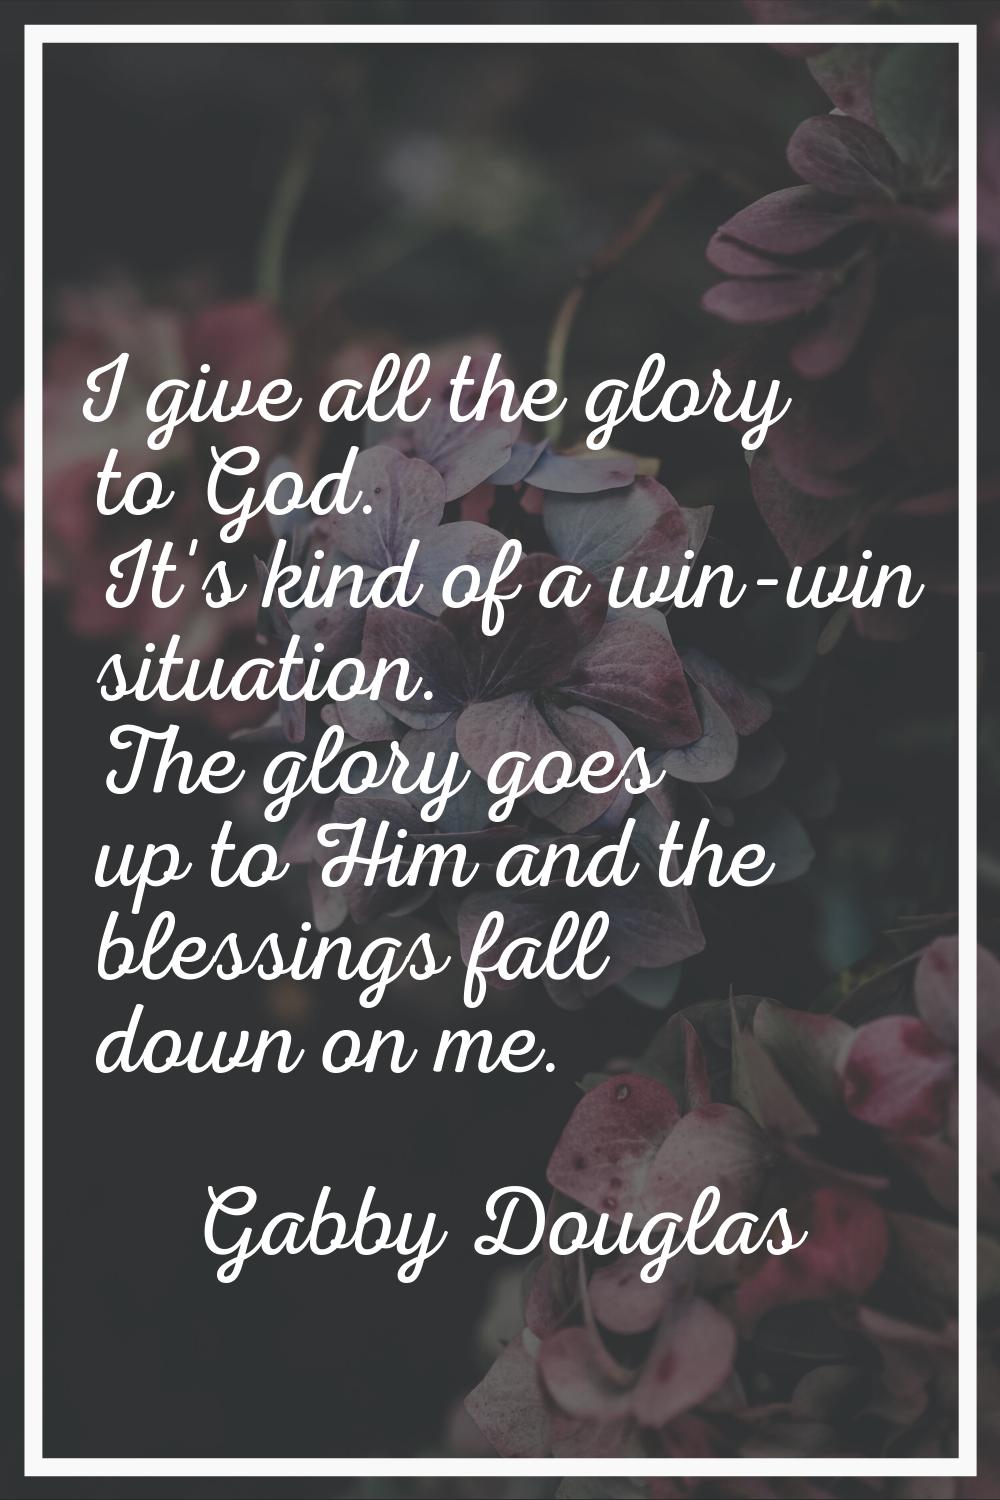 I give all the glory to God. It's kind of a win-win situation. The glory goes up to Him and the ble